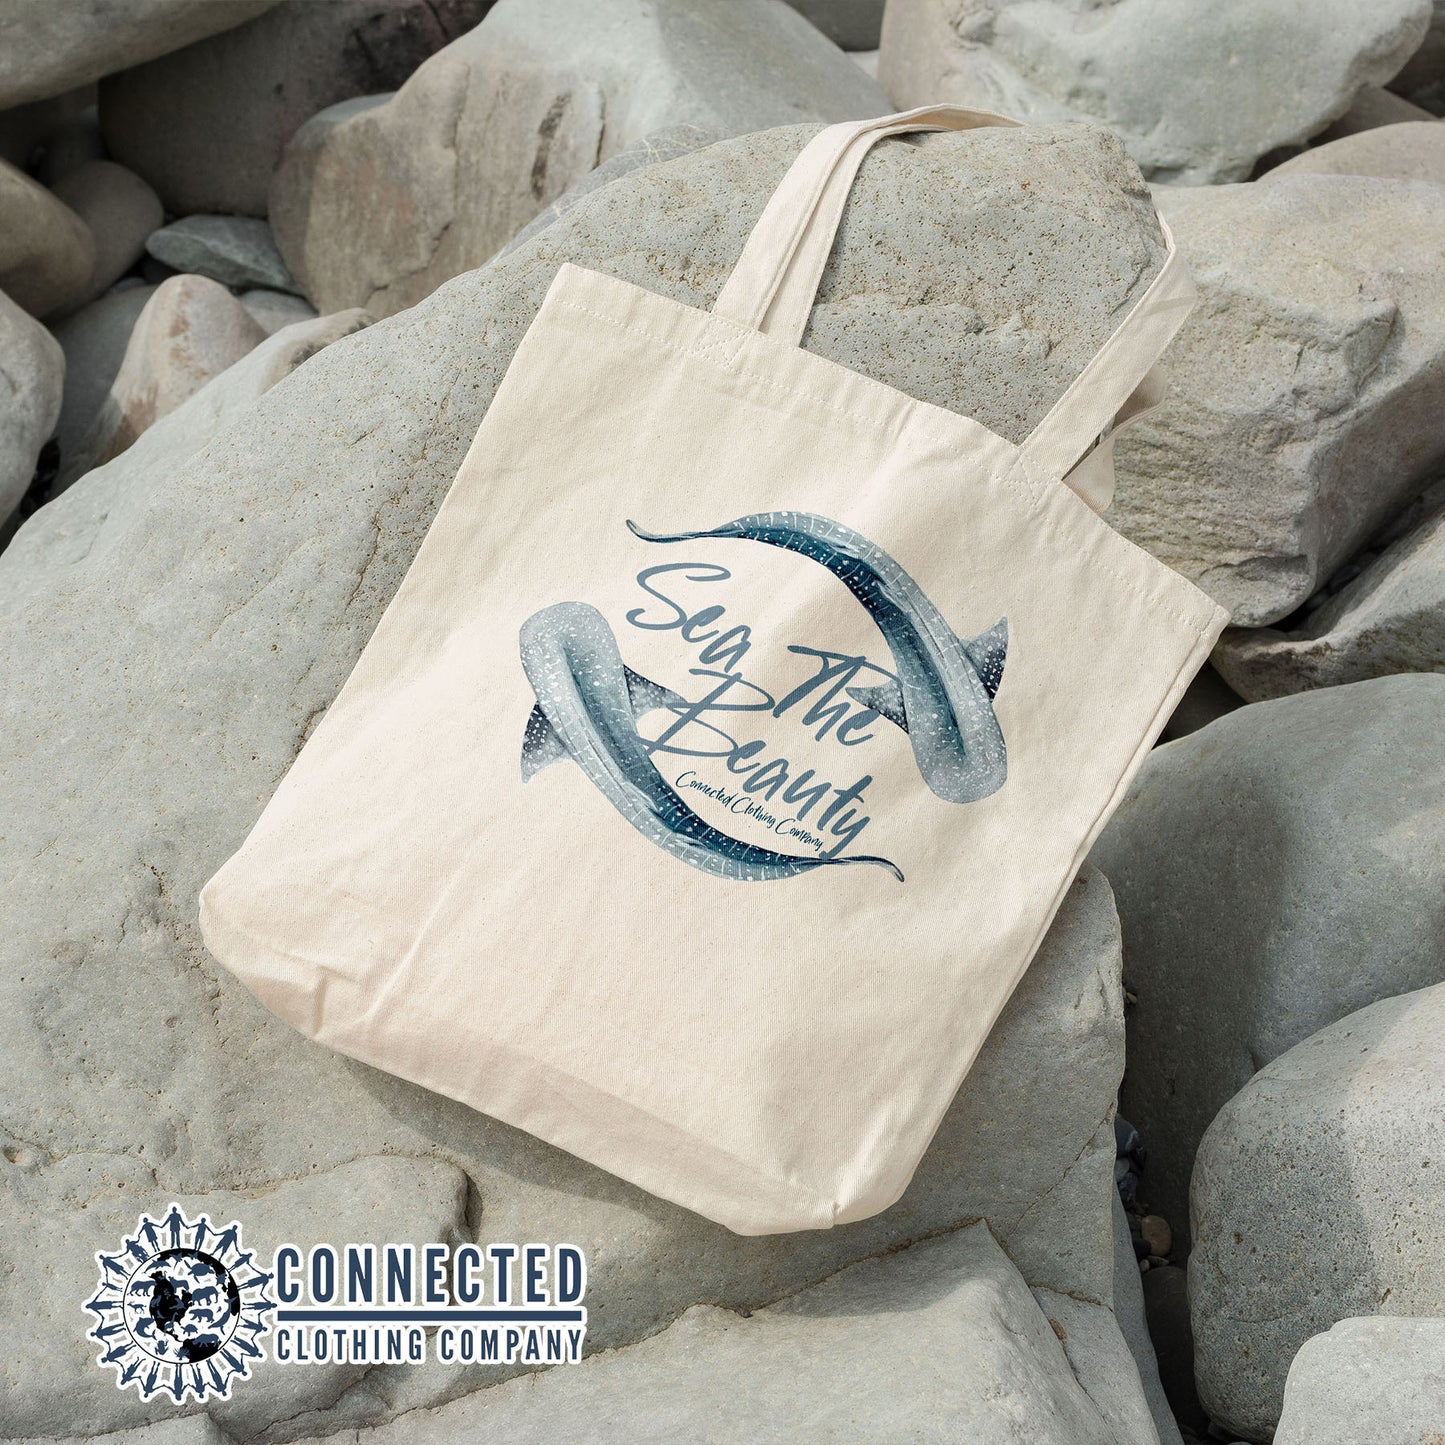 Sea The Beauty Whale Shark Tote - Connected Clothing Company - 10% of proceeds donated to ocean conservation